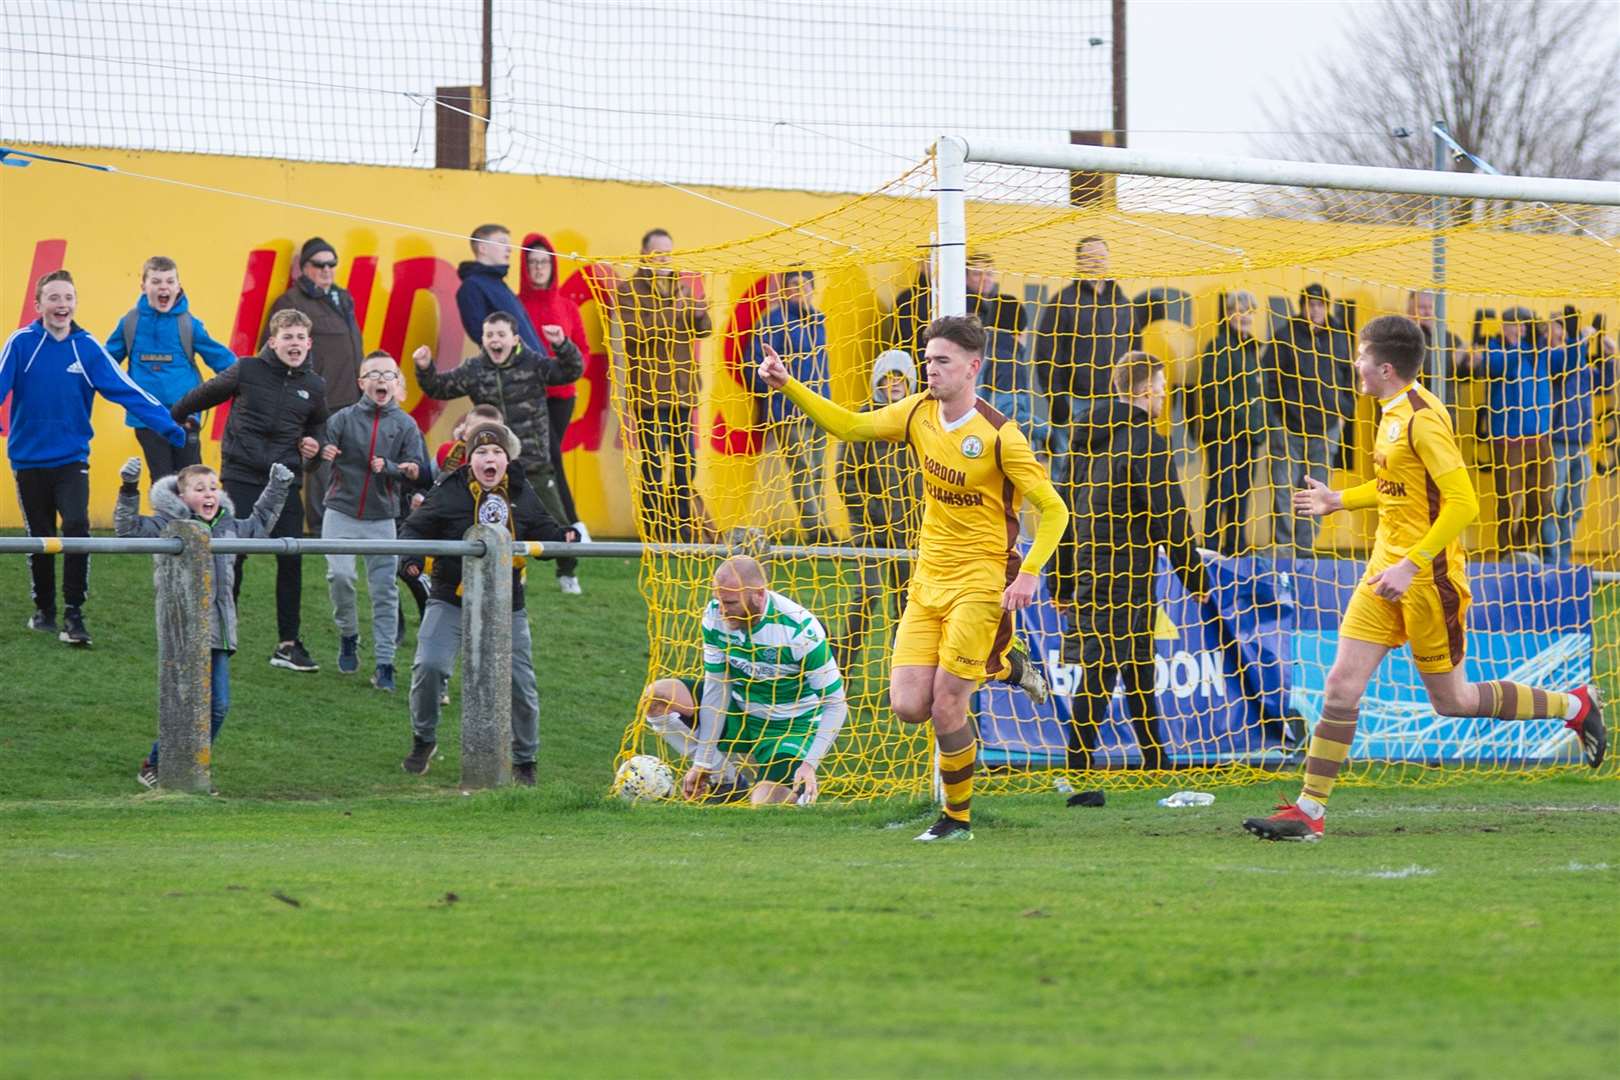 Forres Mechanics' Declan Hughes, on-loan from Ross County, celebrates scoring the second goal of the afternoon. ..Forres Mechanics FC (2) vs Buckie Thistle FC (2) - Highland Football League - Mosset Park, Forres 08/02/2020...Picture: Daniel Forsyth..